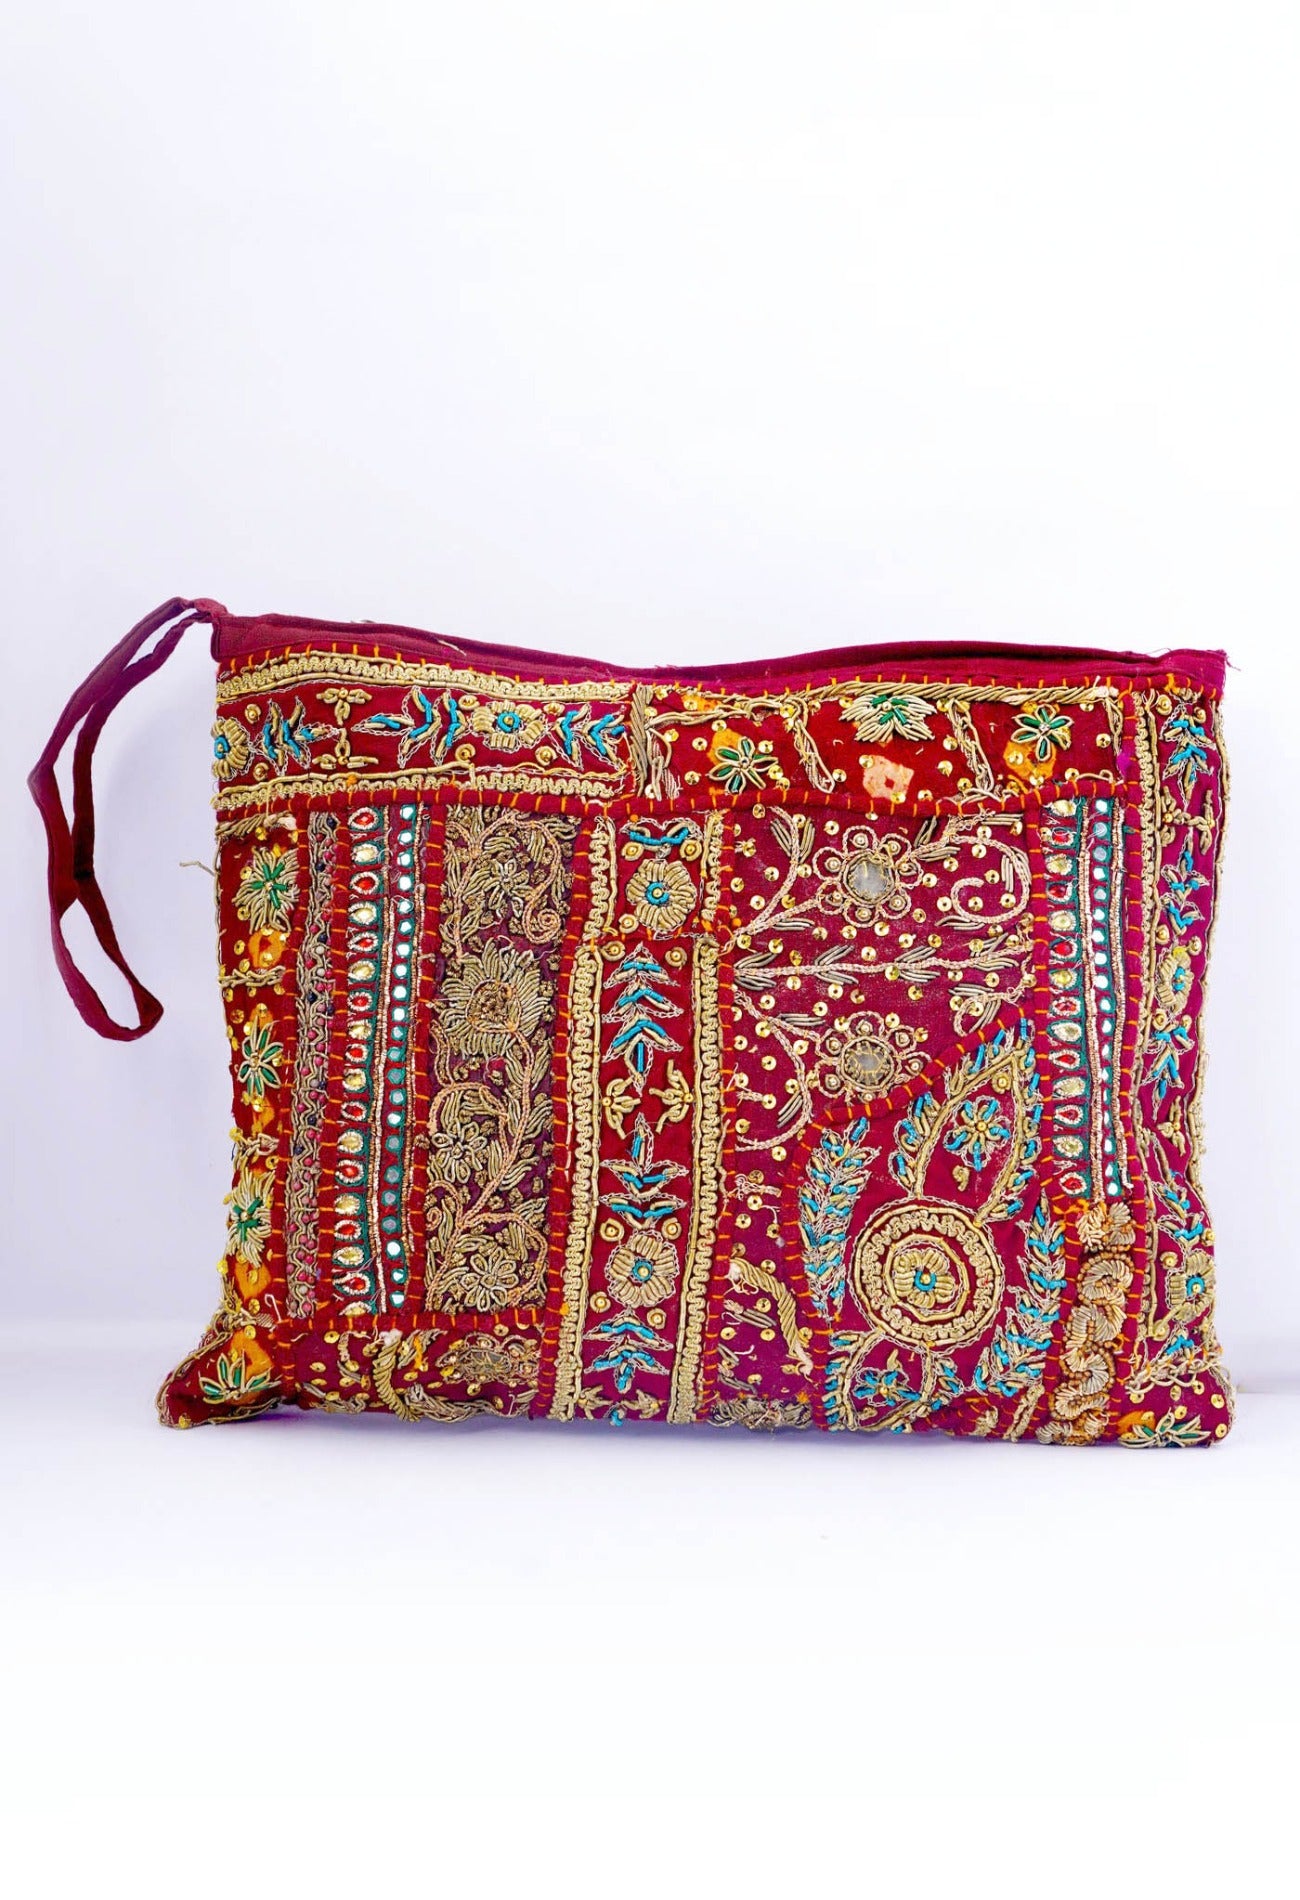 Online Shopping for Red Indian Handicraft Embroidered Hand Bag with Weaving from Rajasthan at Unnatisilks.com India_x000D_
Online Shopping for Red Indian Handicraft Embroidered Hand Bag with Weaving from Rajasthan at Unnatisilks.com India_x000D_
Online Shopping for Red Indian Handicraft Embroidered Hand Bag with Weaving from Rajasthan at Unnatisilks.com India_x000D_
